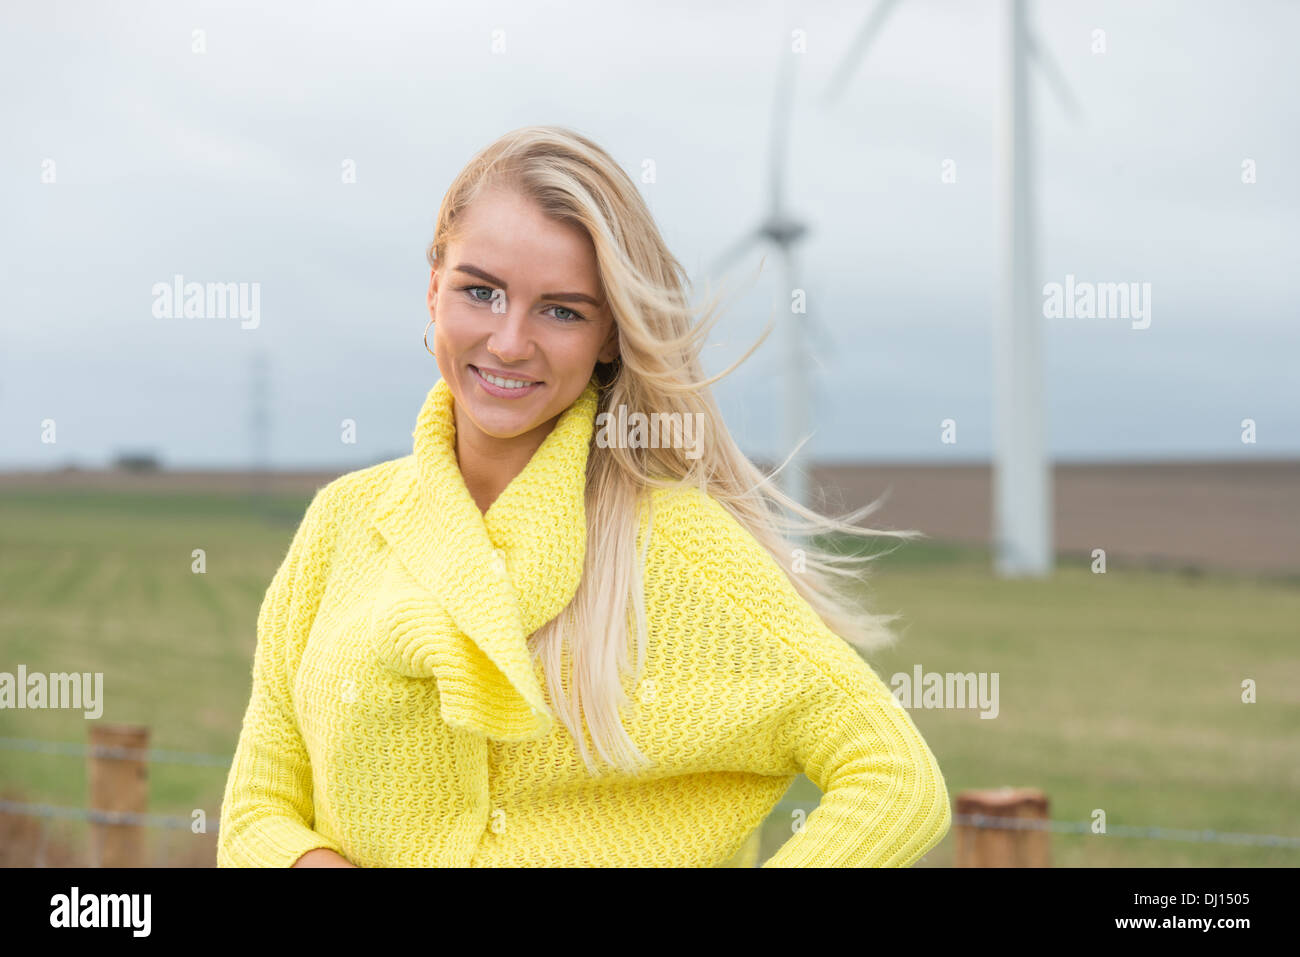 Attrictive blonde haired woman in the countryside with a windfarm in the background Stock Photo